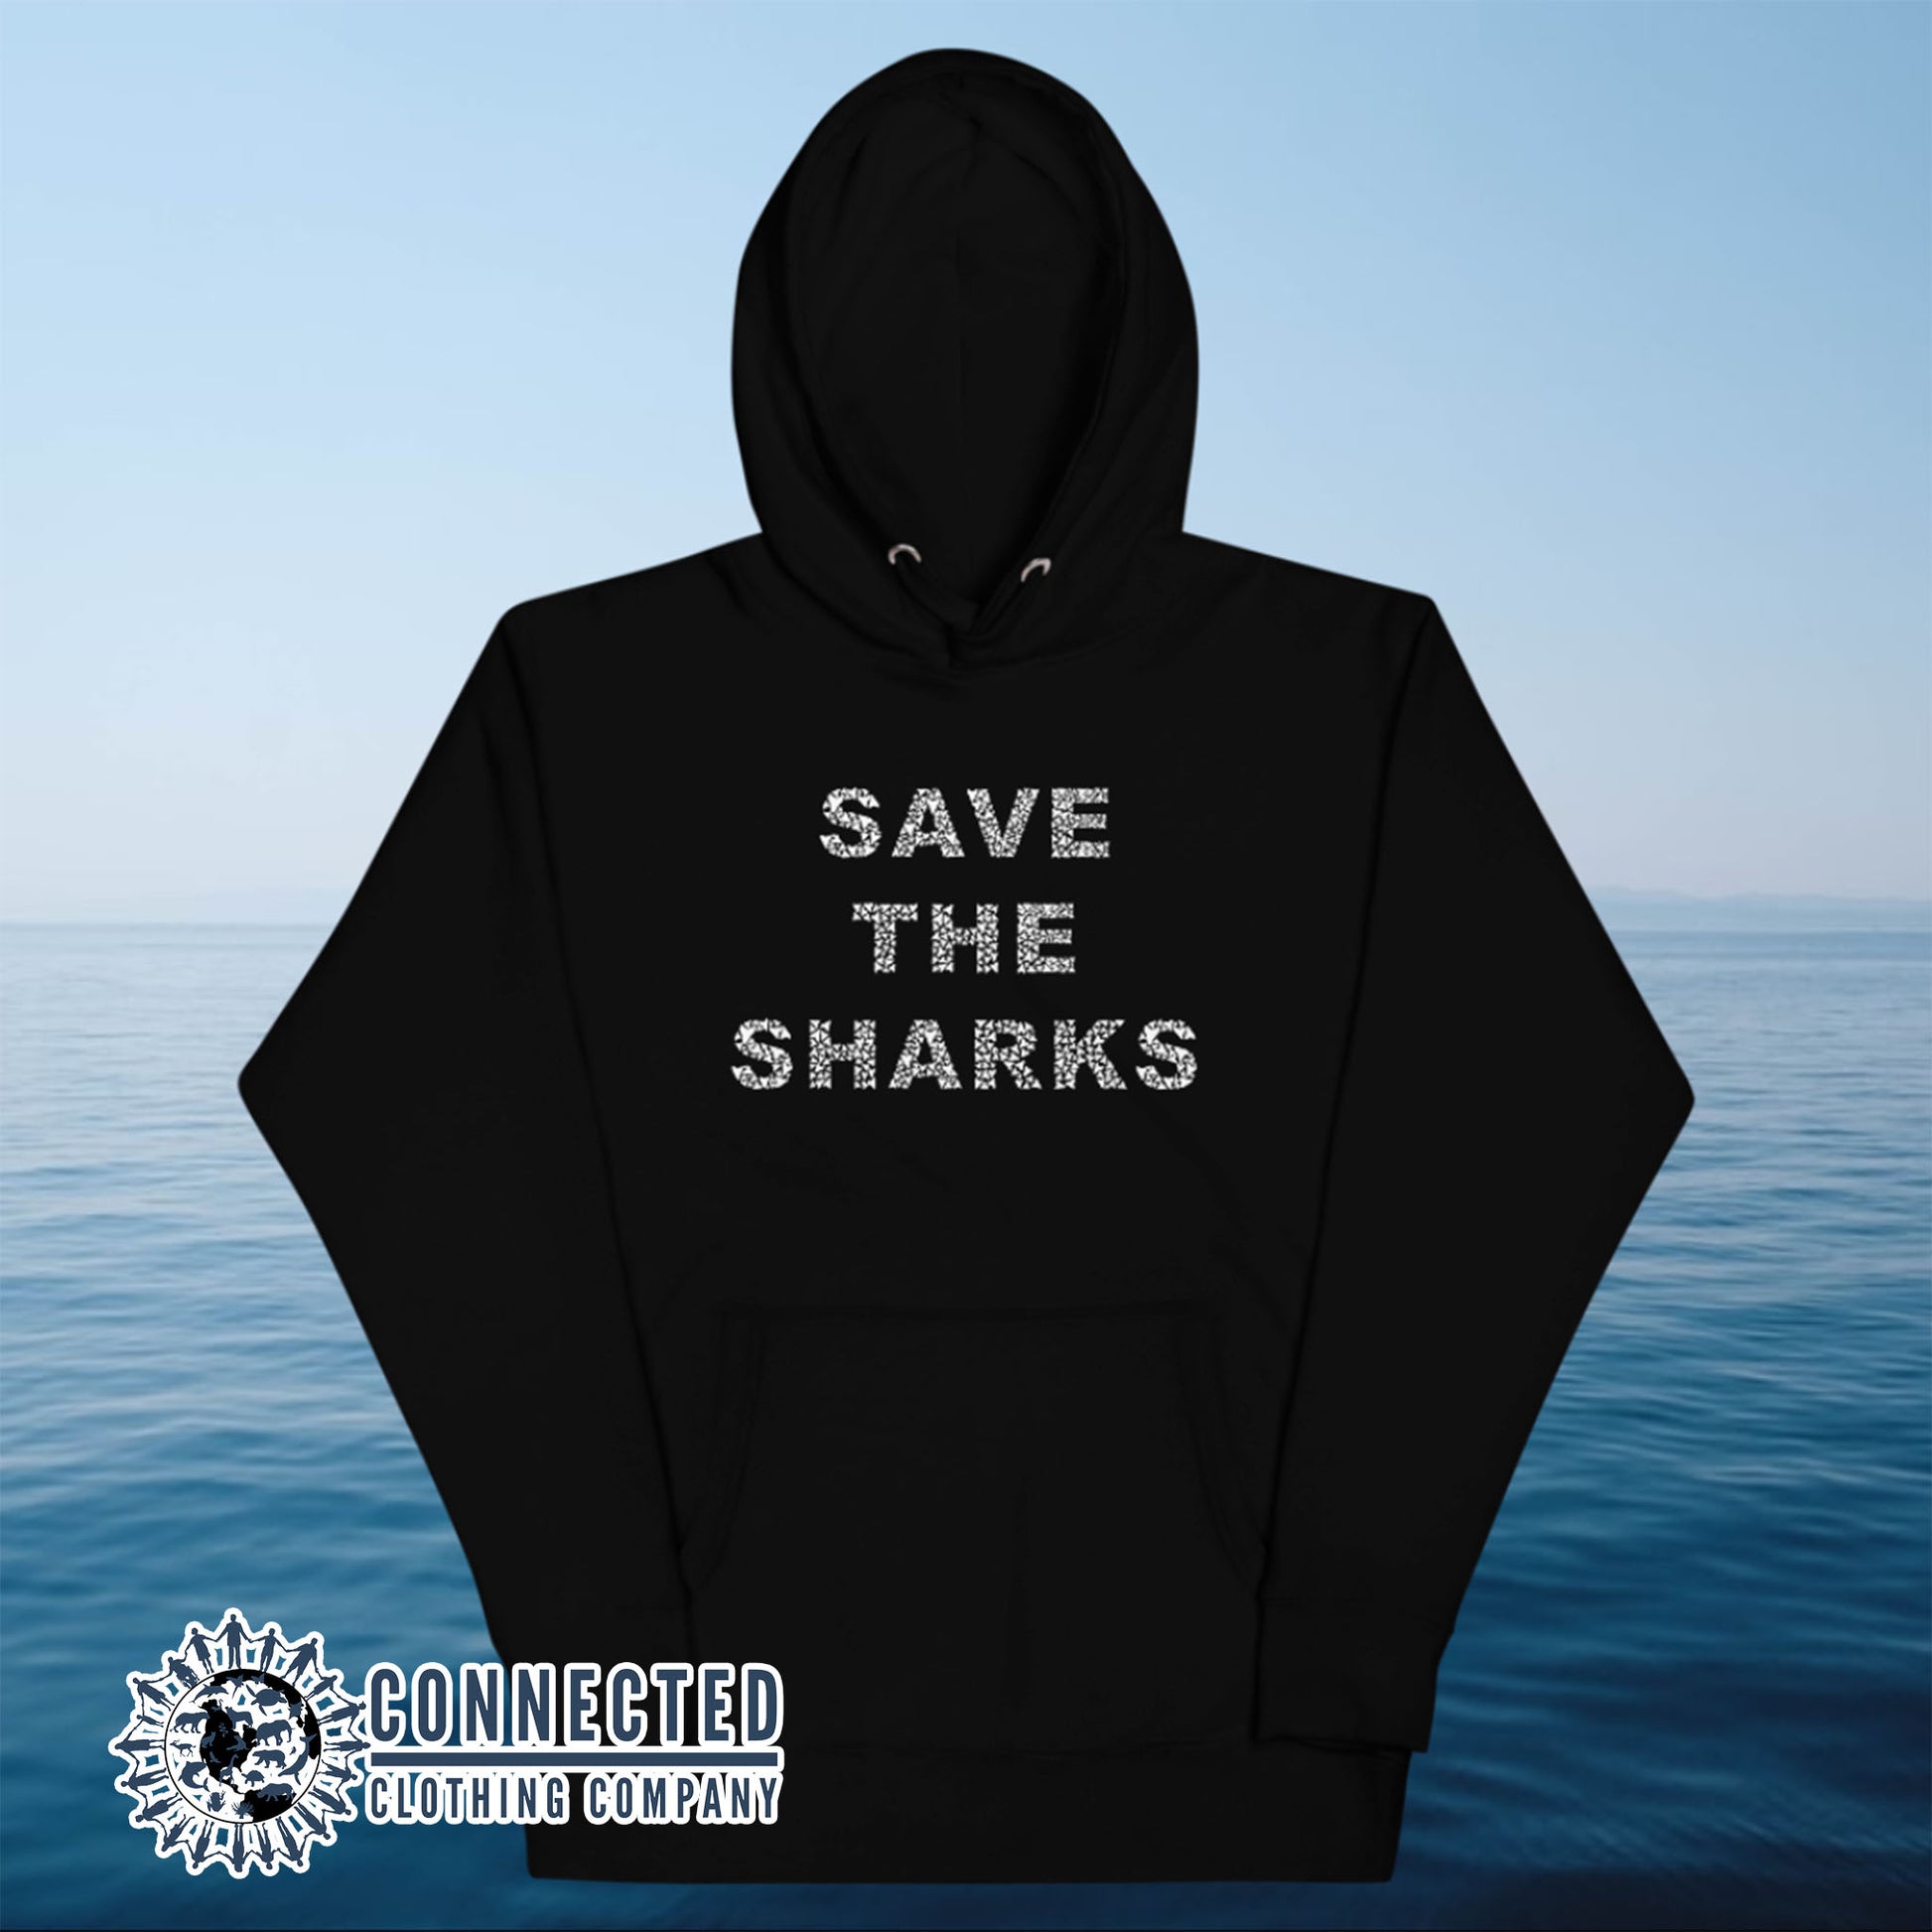 Black Save The Sharks Unisex Hoodie - sweetsherriloudesigns - Ethically and Sustainably Made - 10% donated to Oceana shark conservation